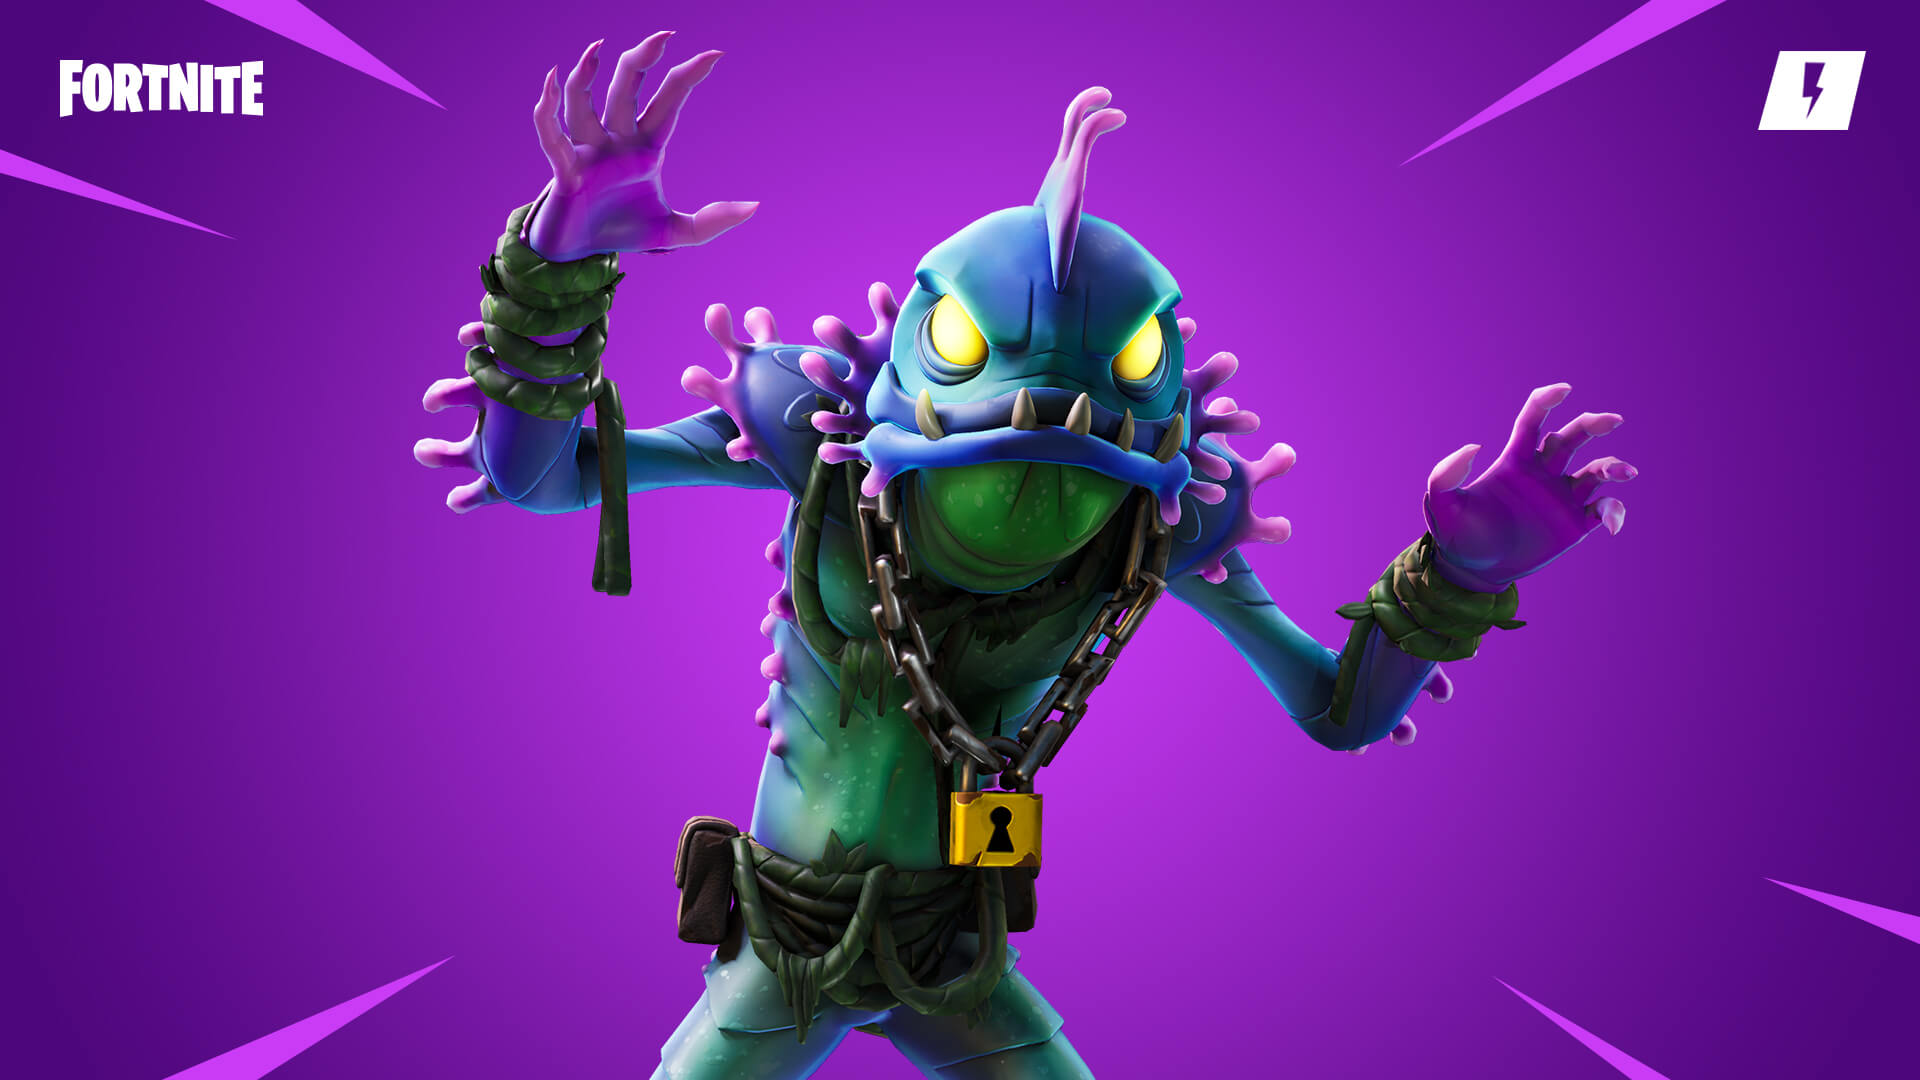 Fortnite V24.10 Update: Epic Games brings Chaos Agent, The Swamp Knight, Mermonster Ken, and more to Fortnite Battle Royale